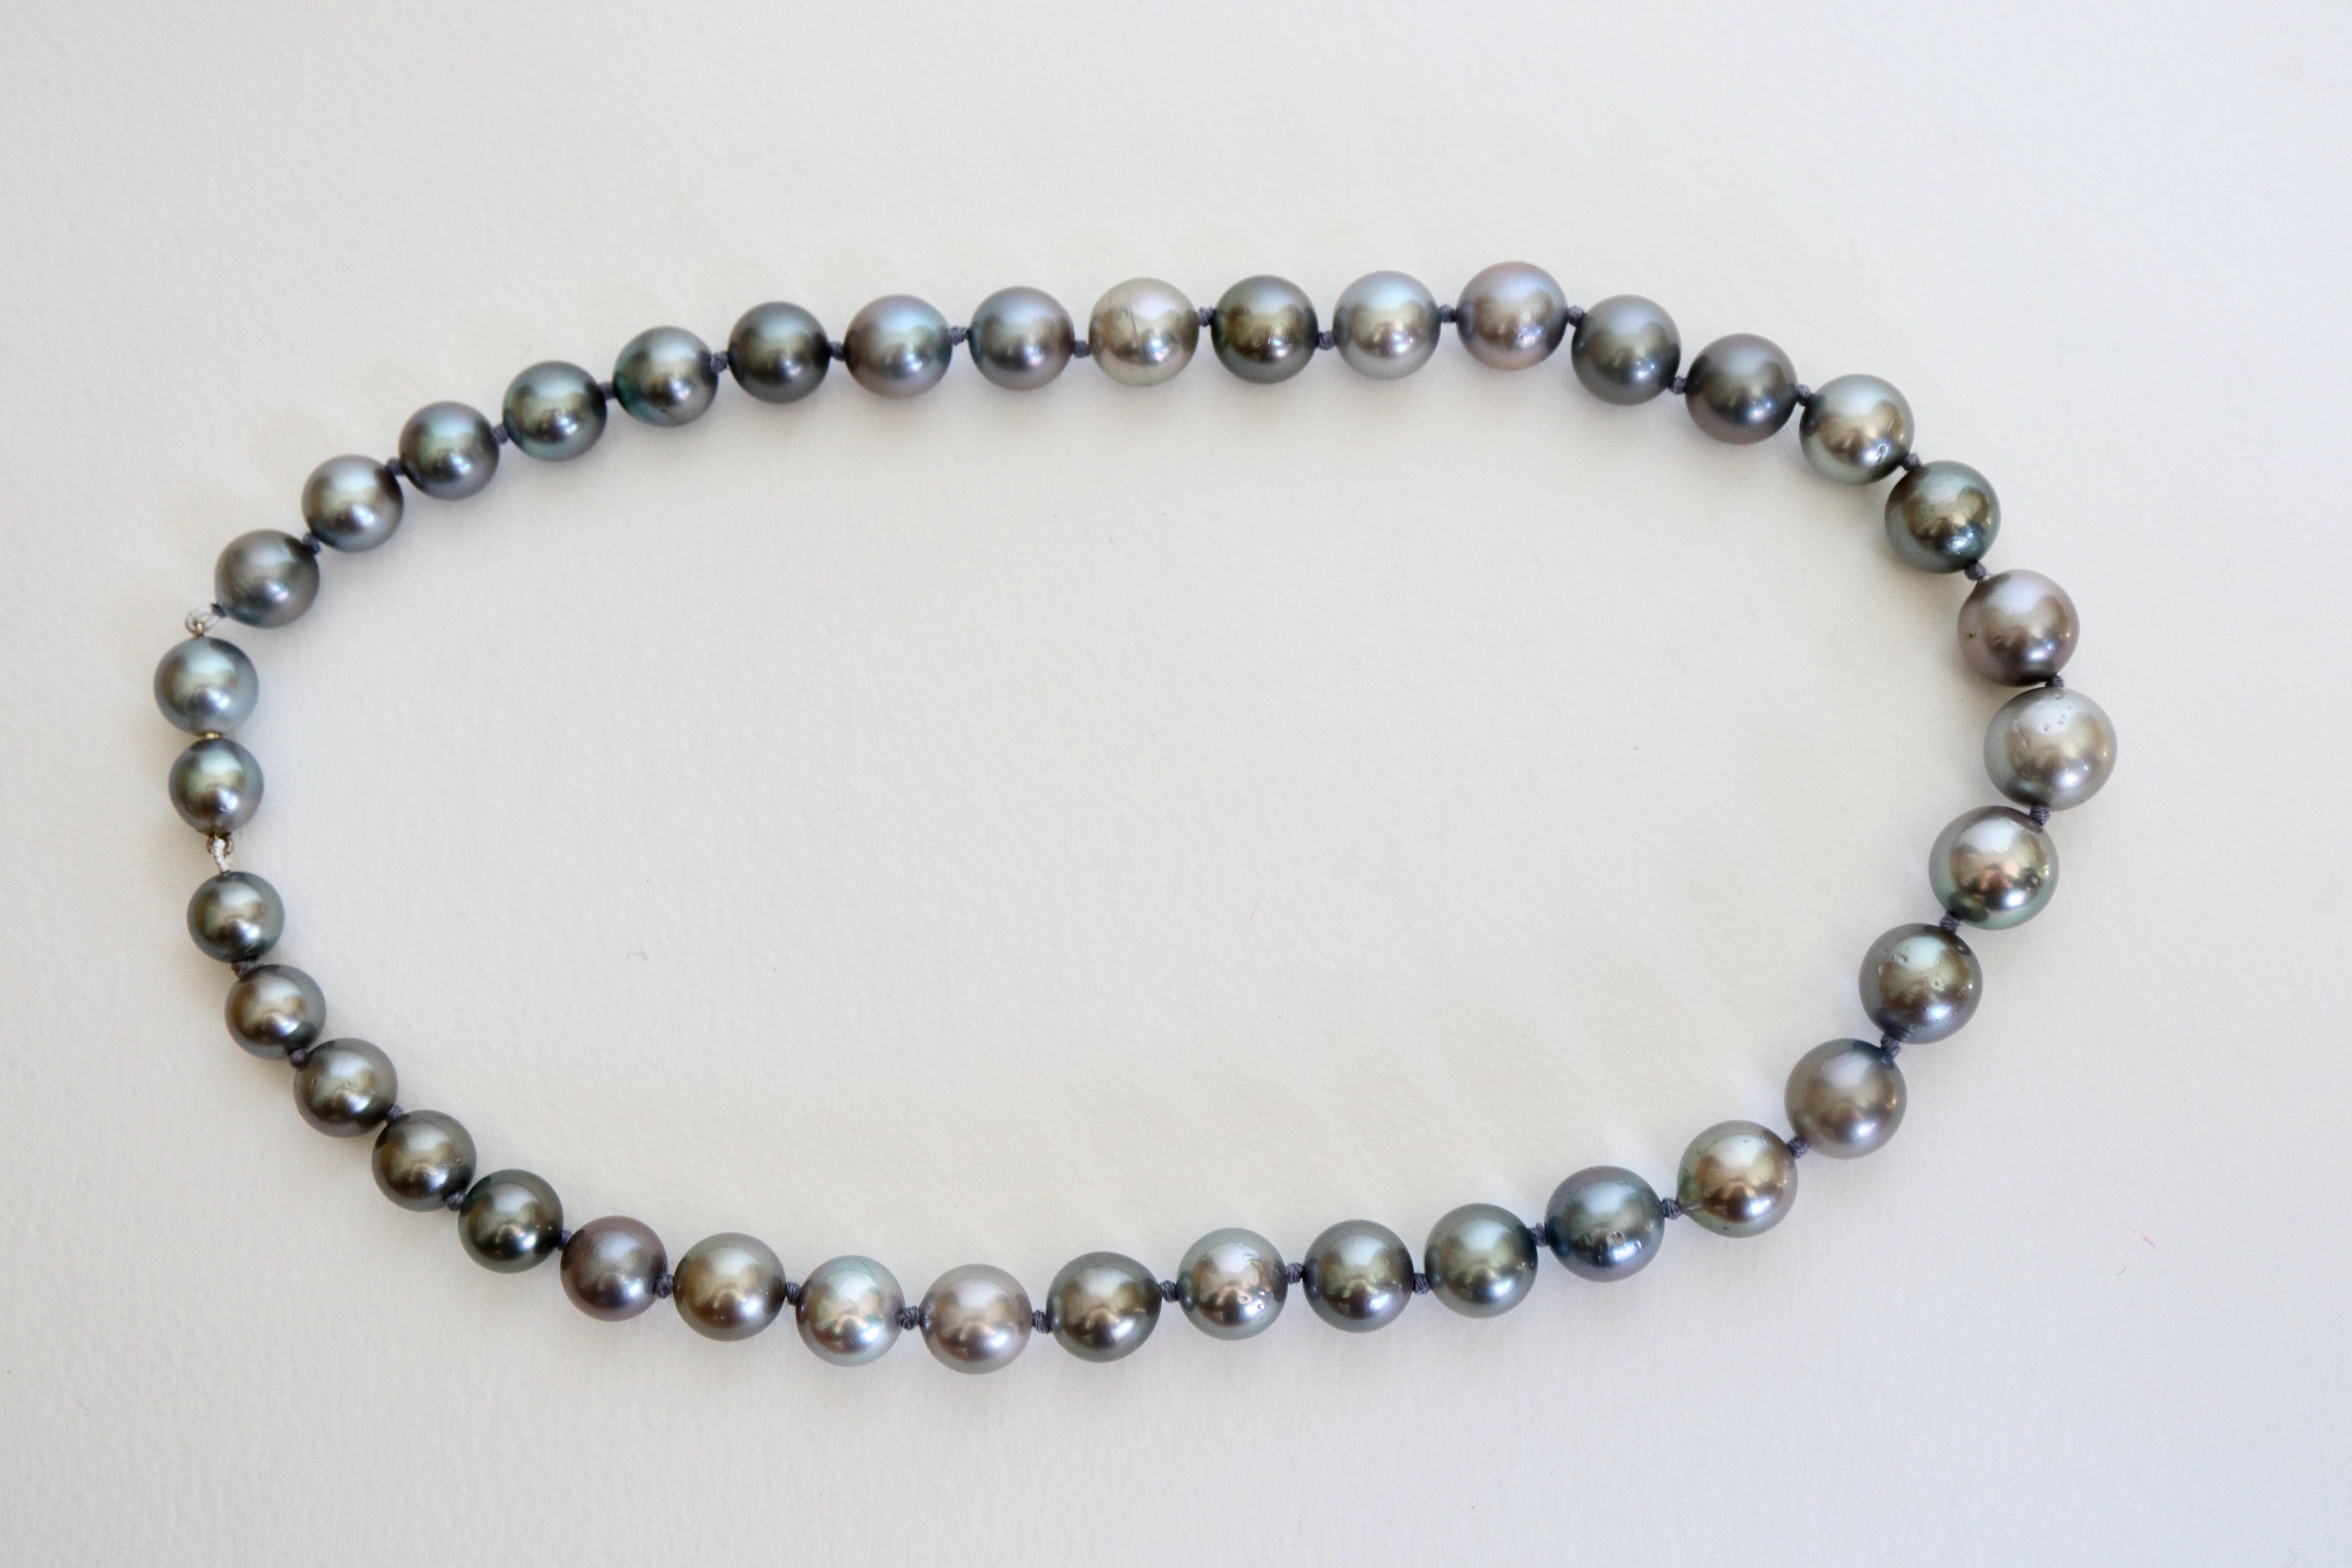 Necklace of Cultured Grey Pearls 9 mm to 13 mm For Sale 2